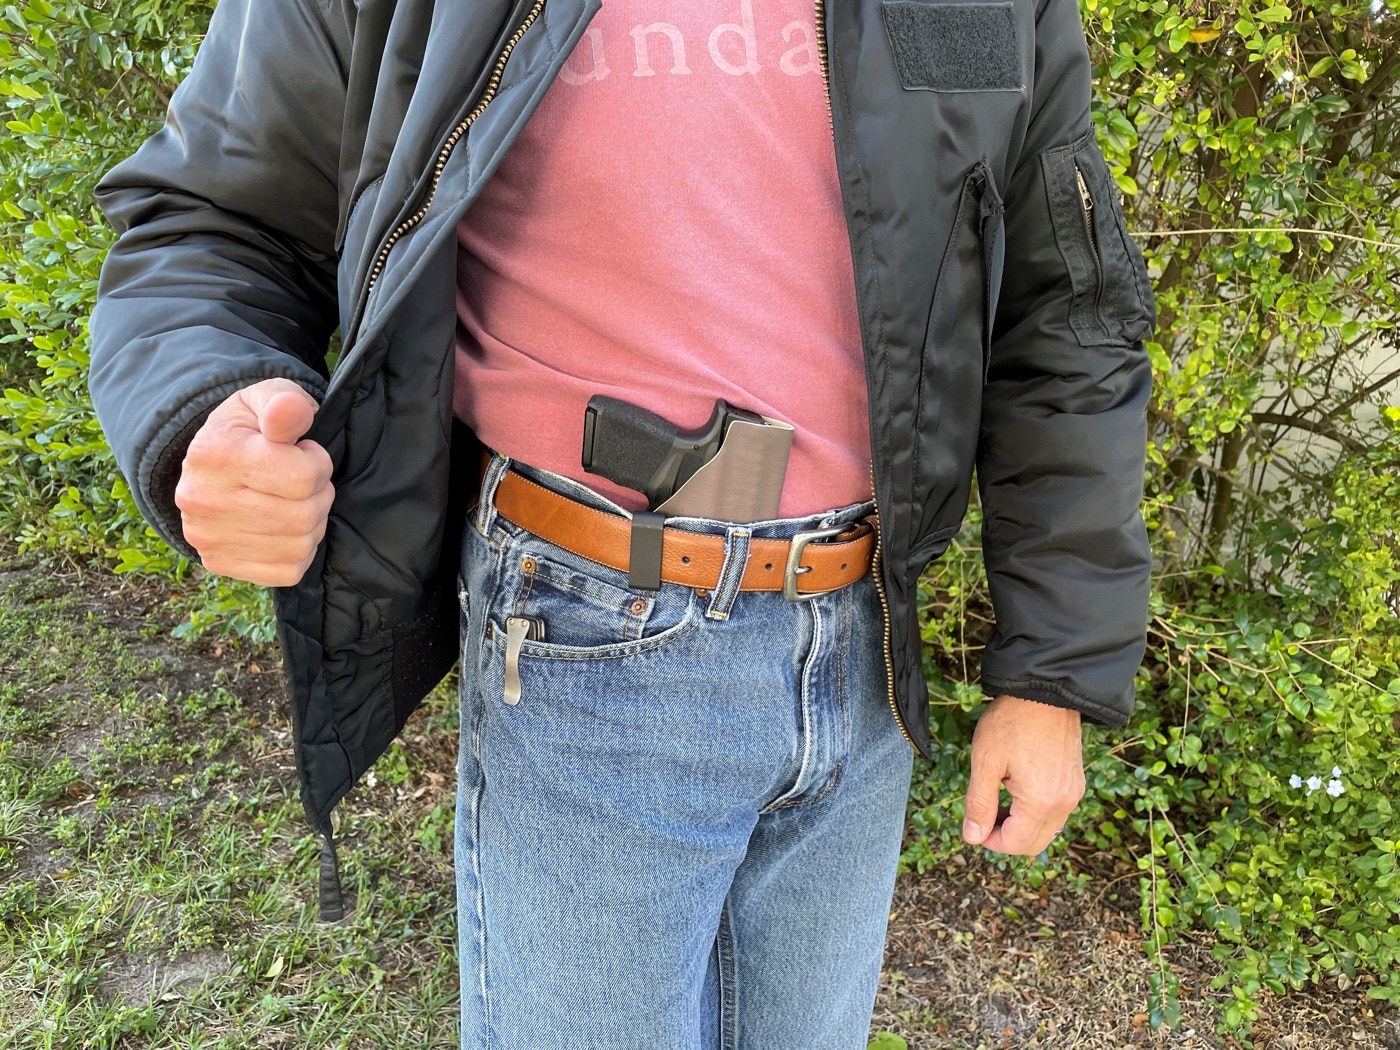 In this photo, the author shows the holster in use with his Springfield Armory Hellcat micro compact 9mm pistol. He was able to make the holster with relative ease. Many of the tools he used could be replaced by a single Dremel kit, though full size shop tools are likely easier to work with. a homemade Kydex holster